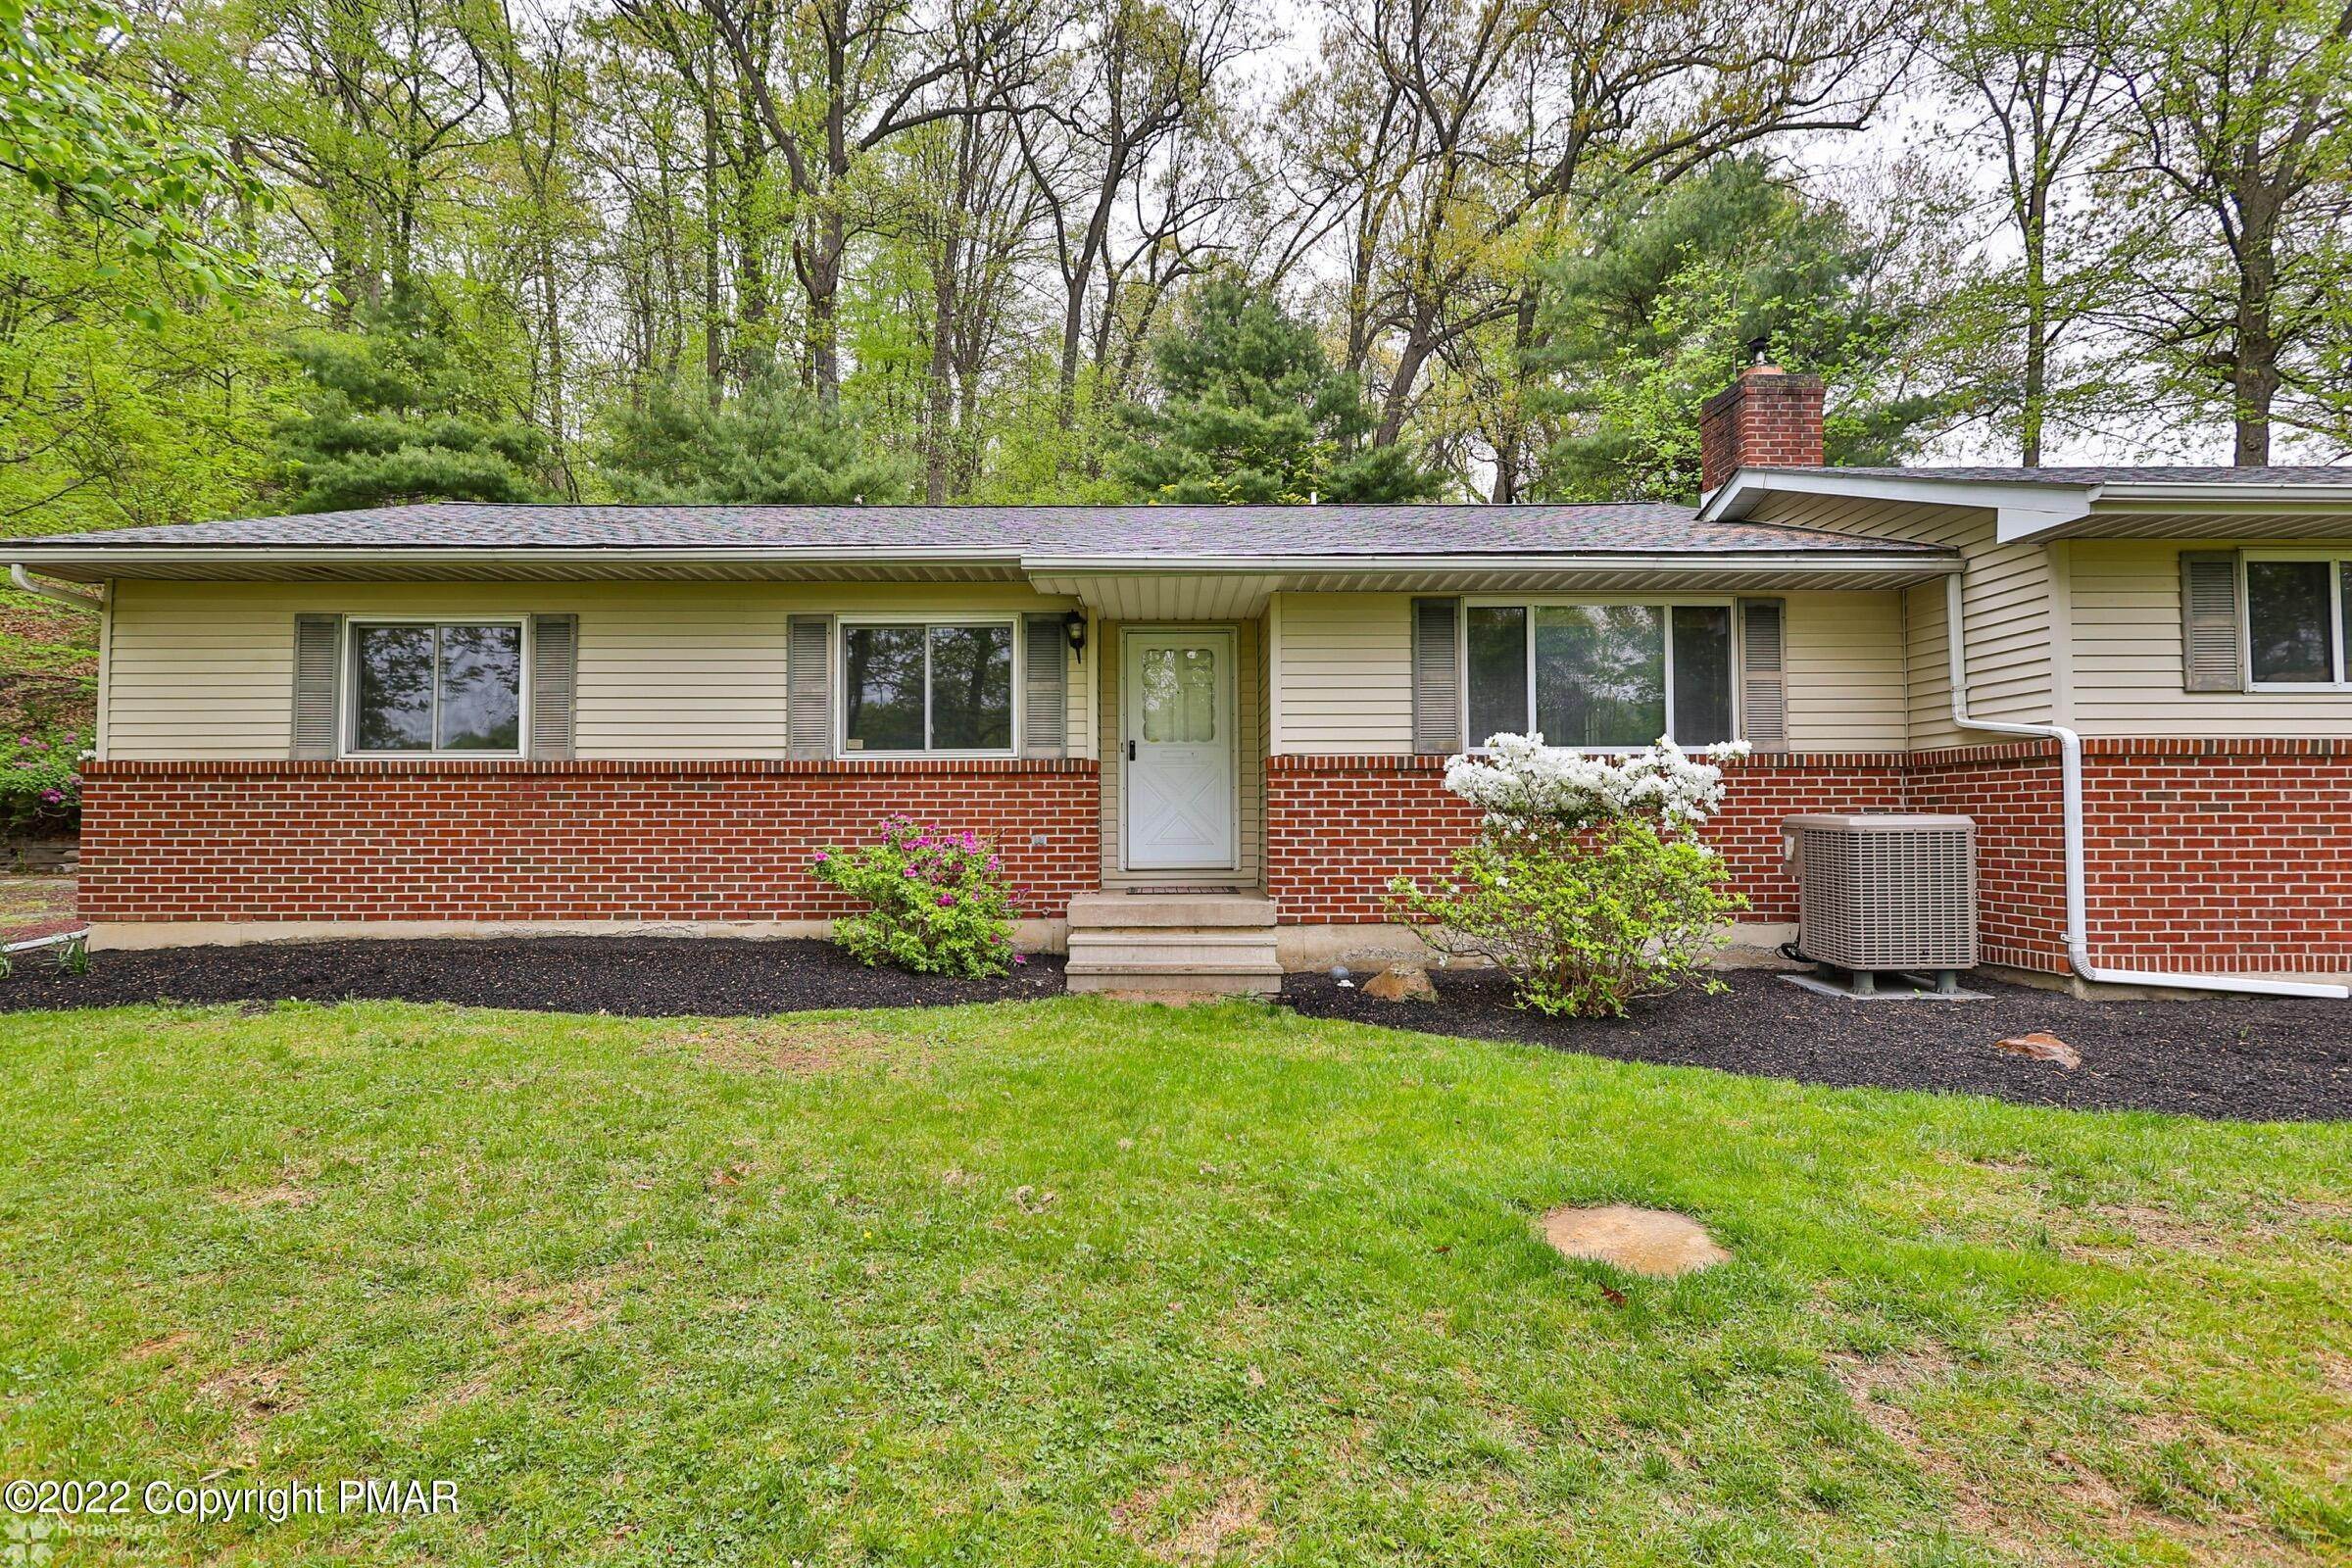 2. Single Family Homes for Sale at 3044 Beacon Rd Allentown, Pennsylvania 18103 United States